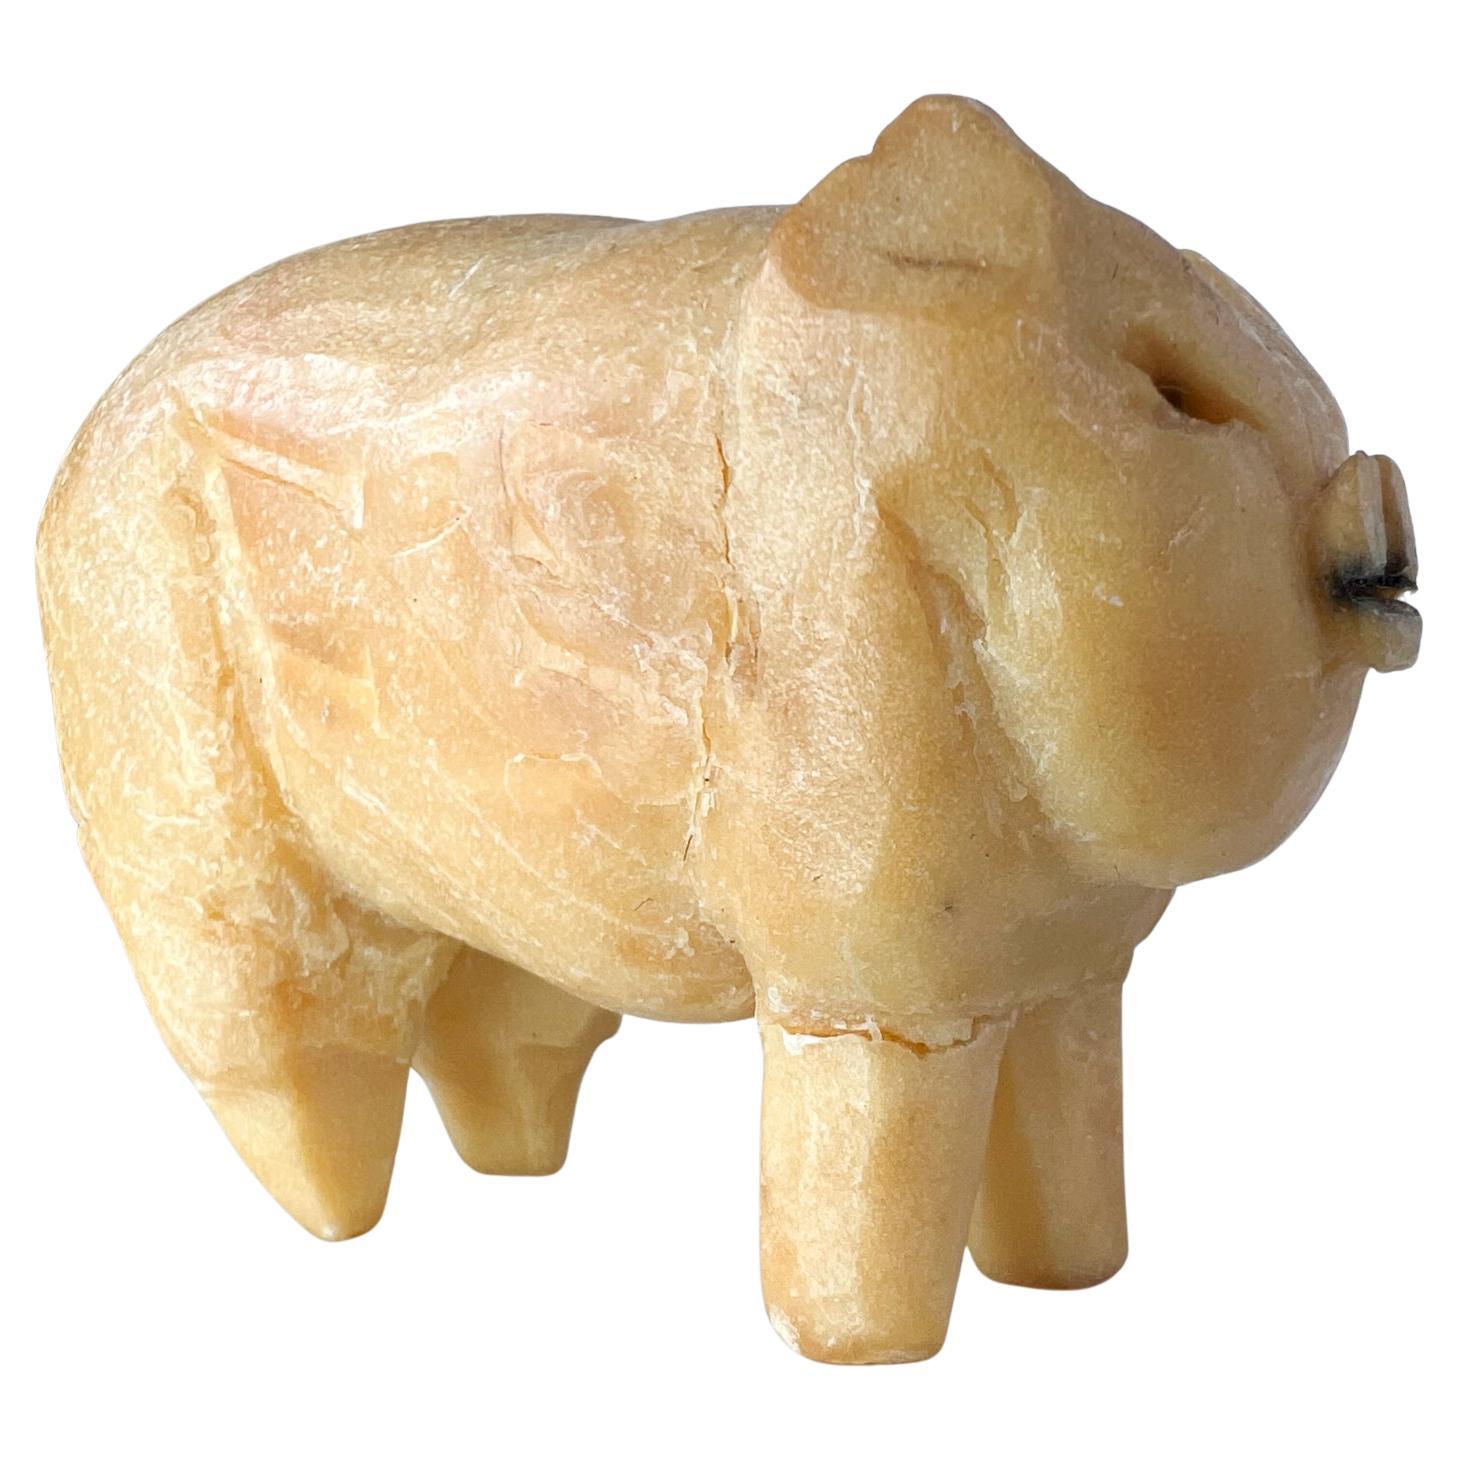 1940s Folk Art Modern Vintage PIG Castile soap sculpture carving presents with fractured leg.
2.75 w x 2.13 tall x 1.38 d
Preowned vintage condition unrestored, damage to leg present.
A little fracture present.
See all images provided.
 